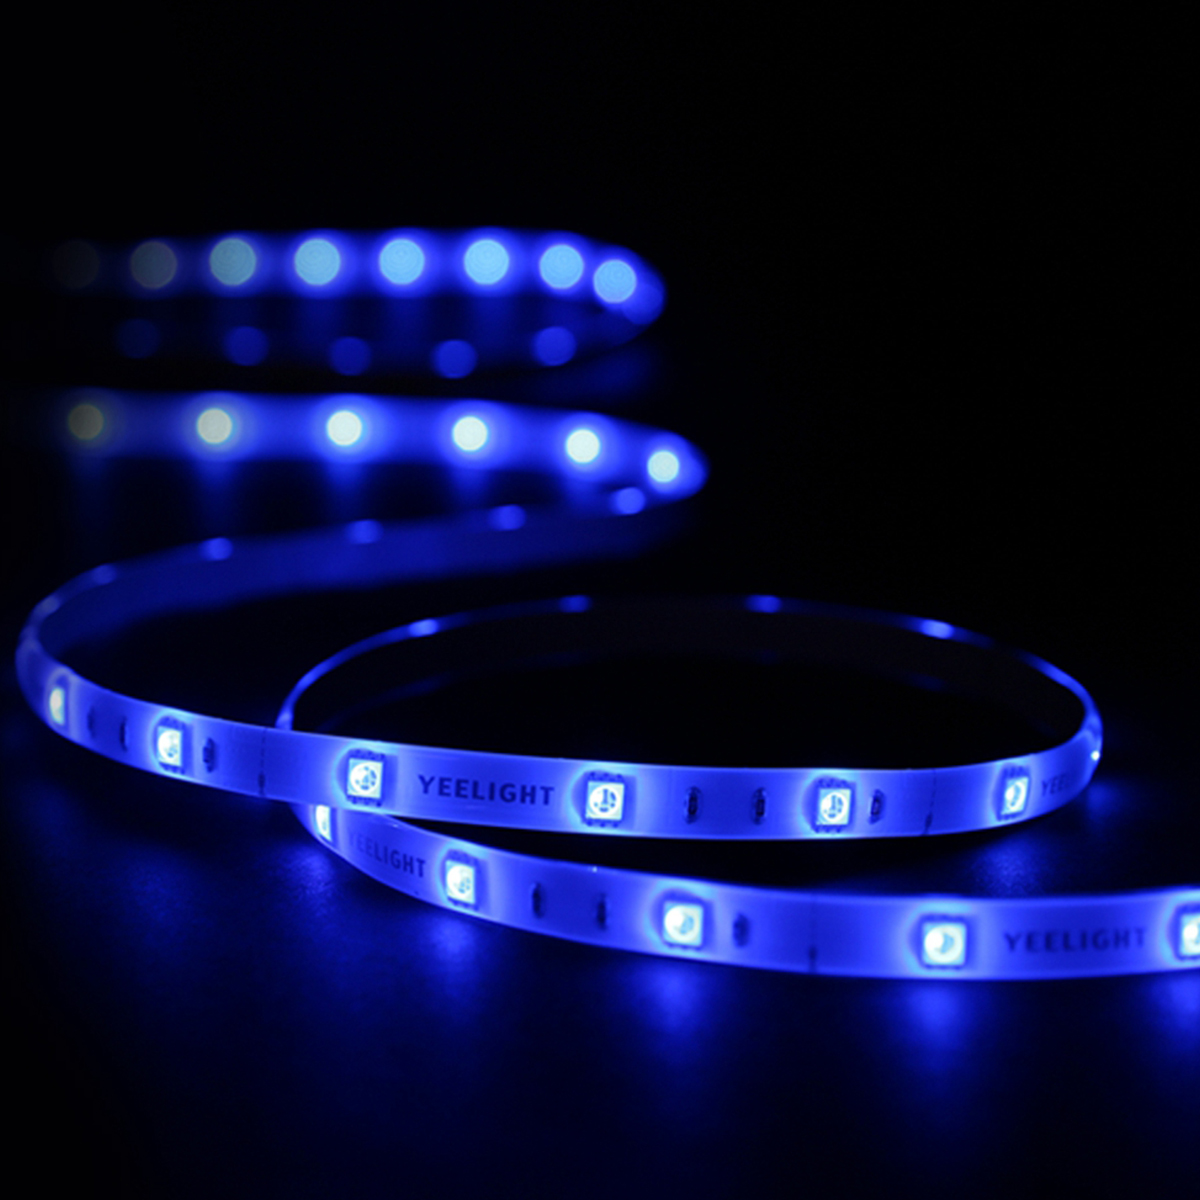 Find Yeelight YLDD05YL 1S 2M Smart APP RGB LED Strip Light Work with Homekit SmartThings US Plug Xiaomi Ecosystem Product for Sale on Gipsybee.com with cryptocurrencies